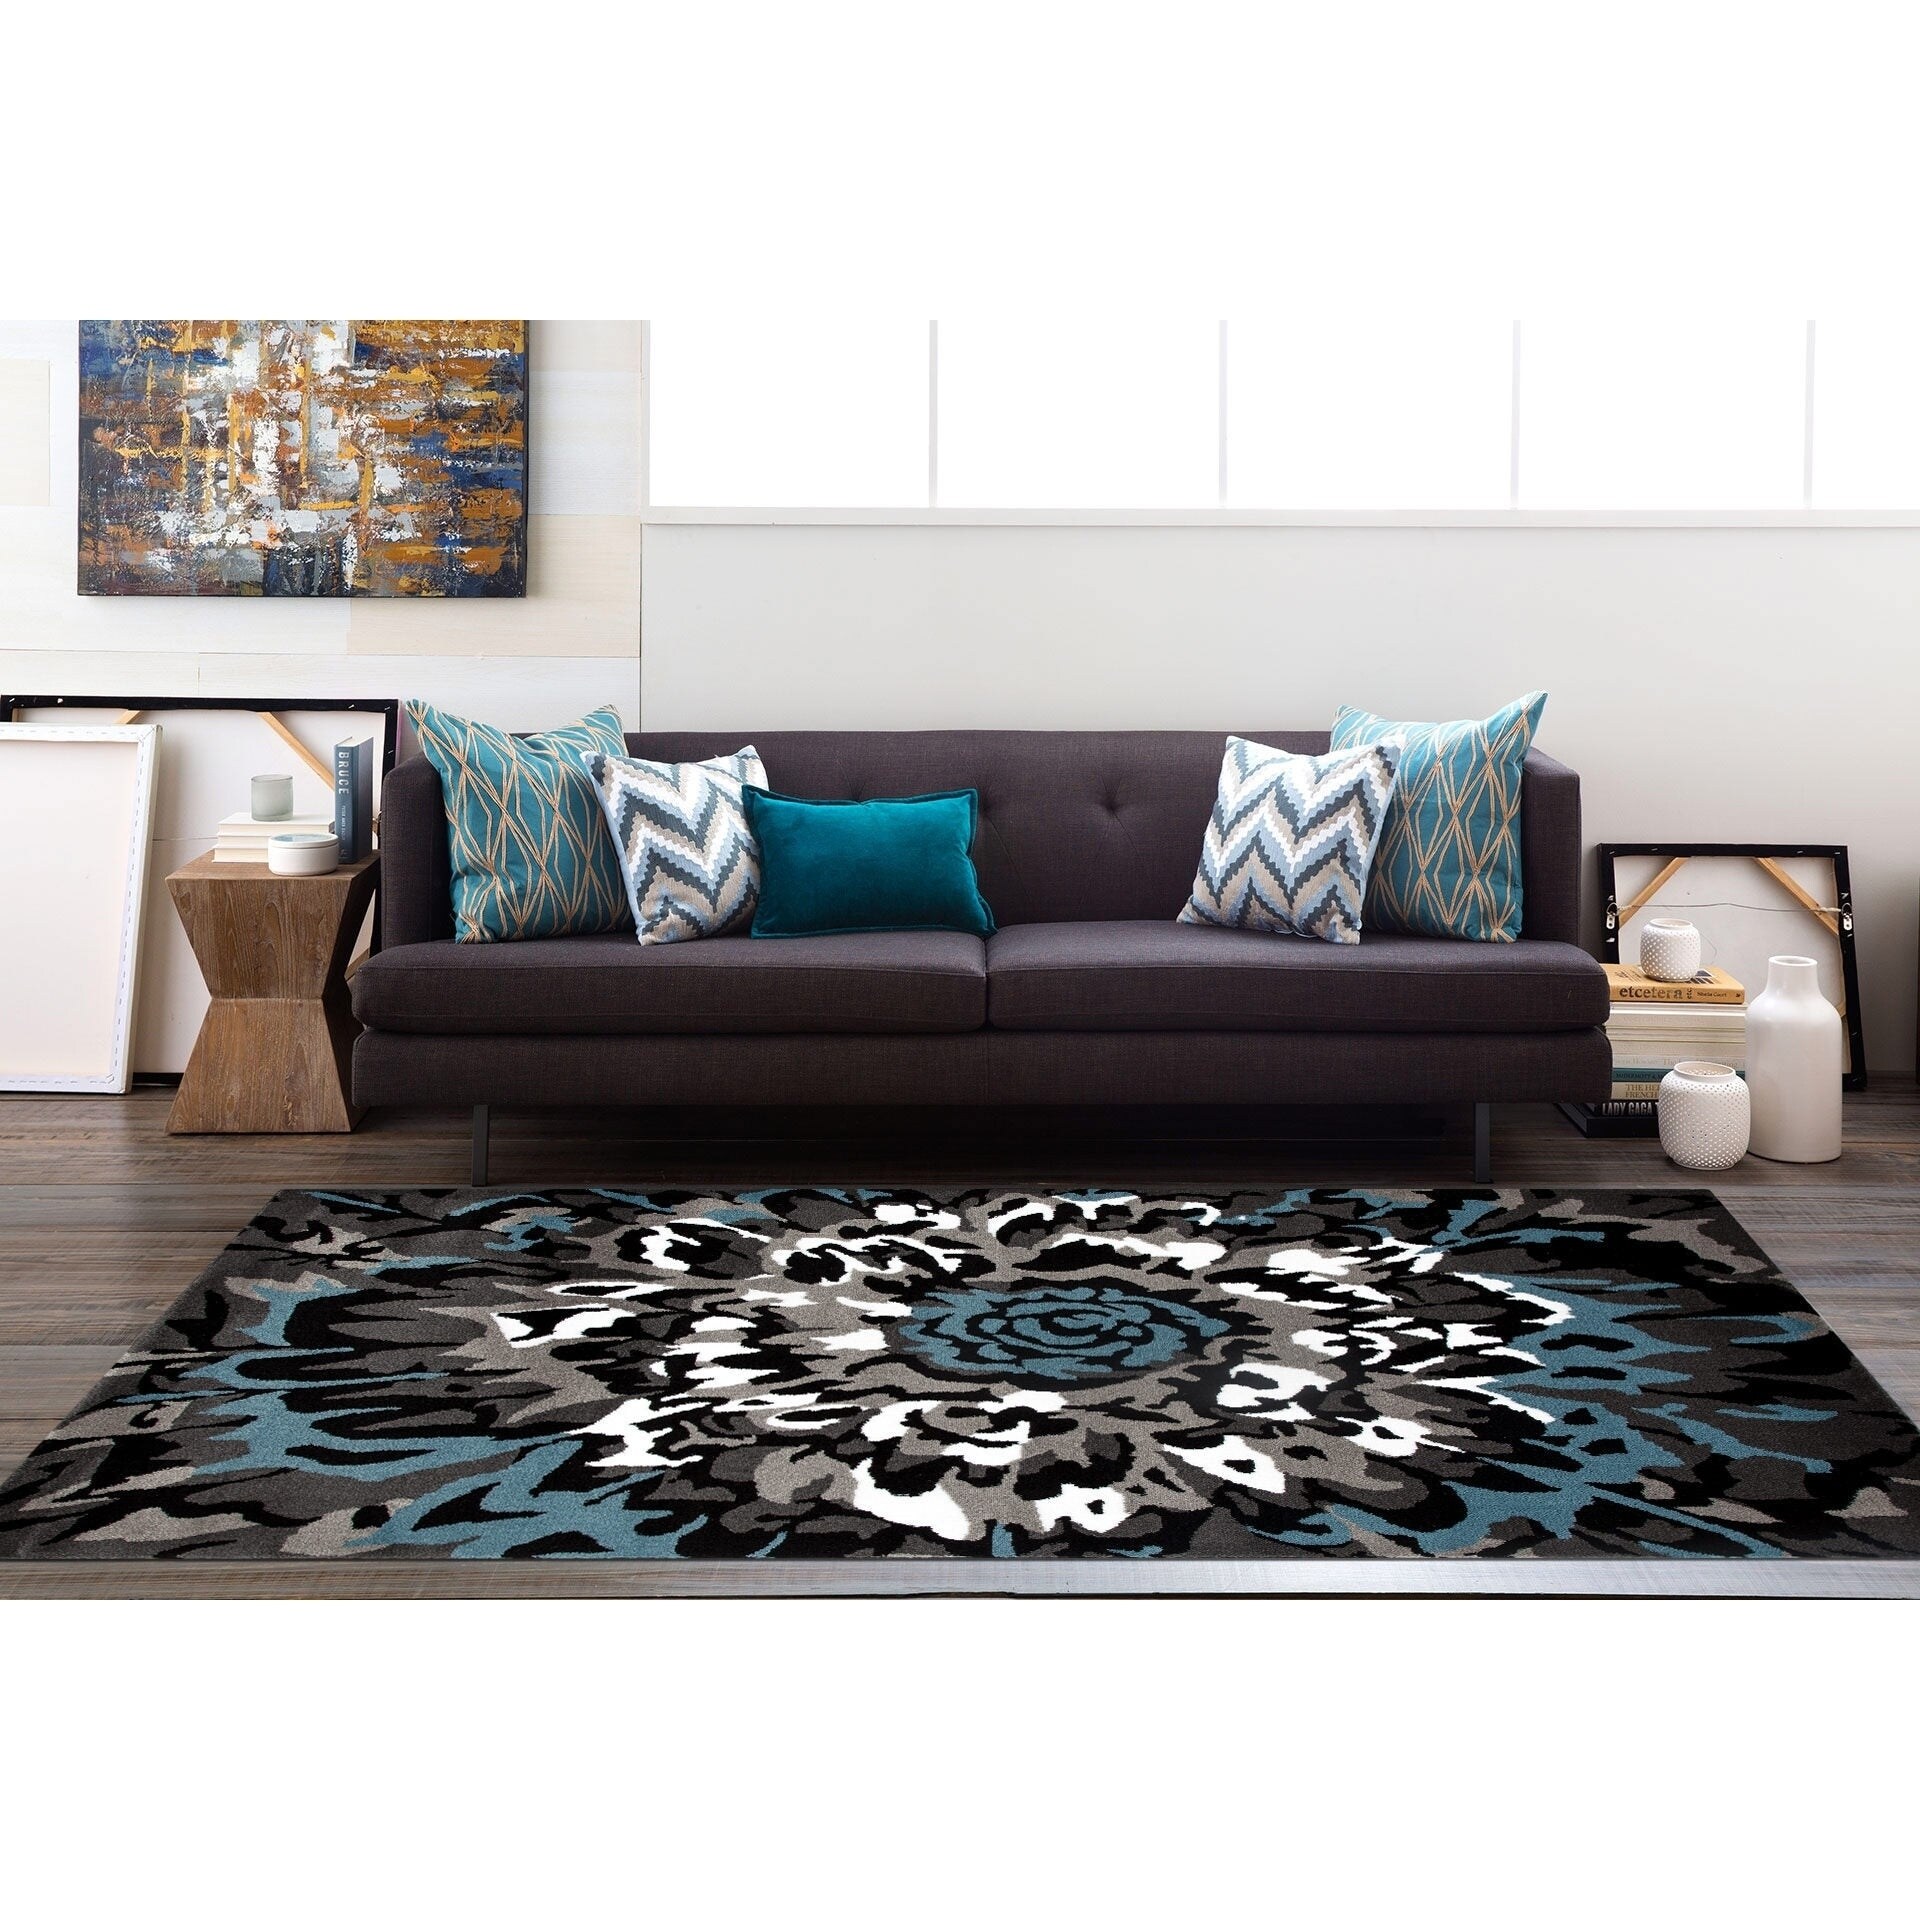 Large Size Modern Abstract Area Rugs,Vintage Art Print Non-Slip Extra Large Carpet Blue Floral Butterfly Animal Print Blue Mat Decor for Kitchen Living Room Bedroom Play Room,160X200Cm 62.99X78.74Inc